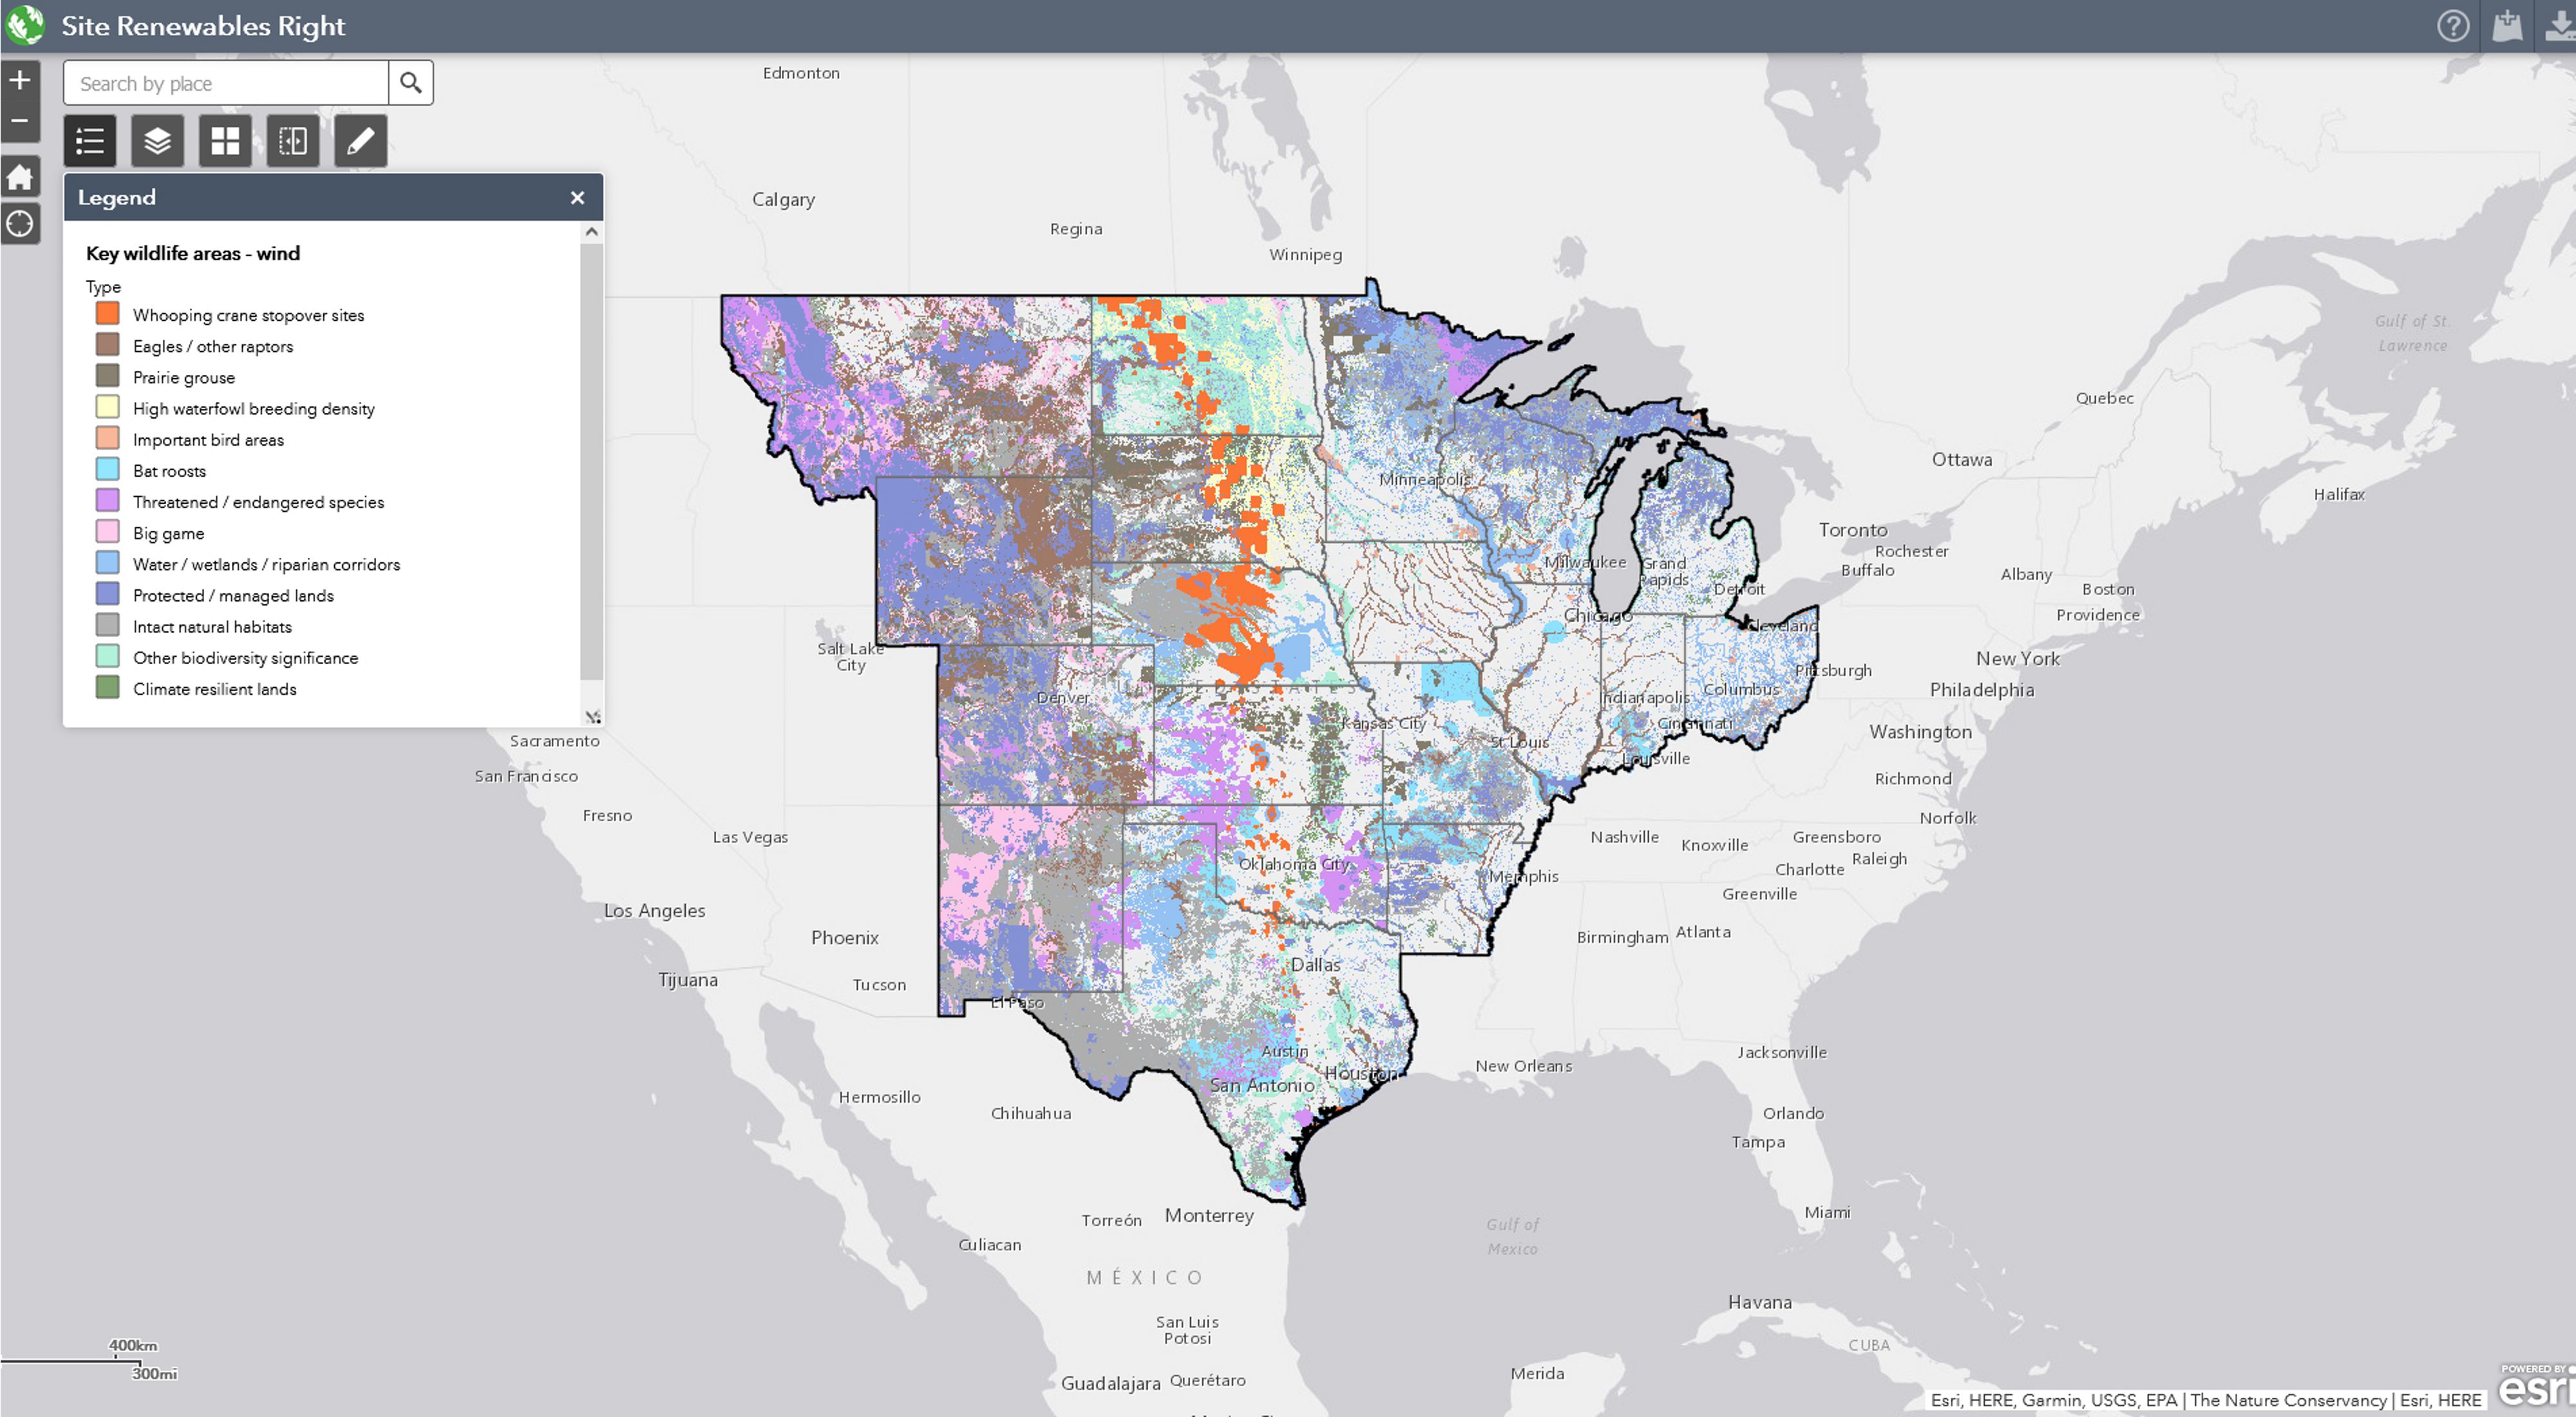 Map of Site Wind Right's wildlife layers in the central U.S.